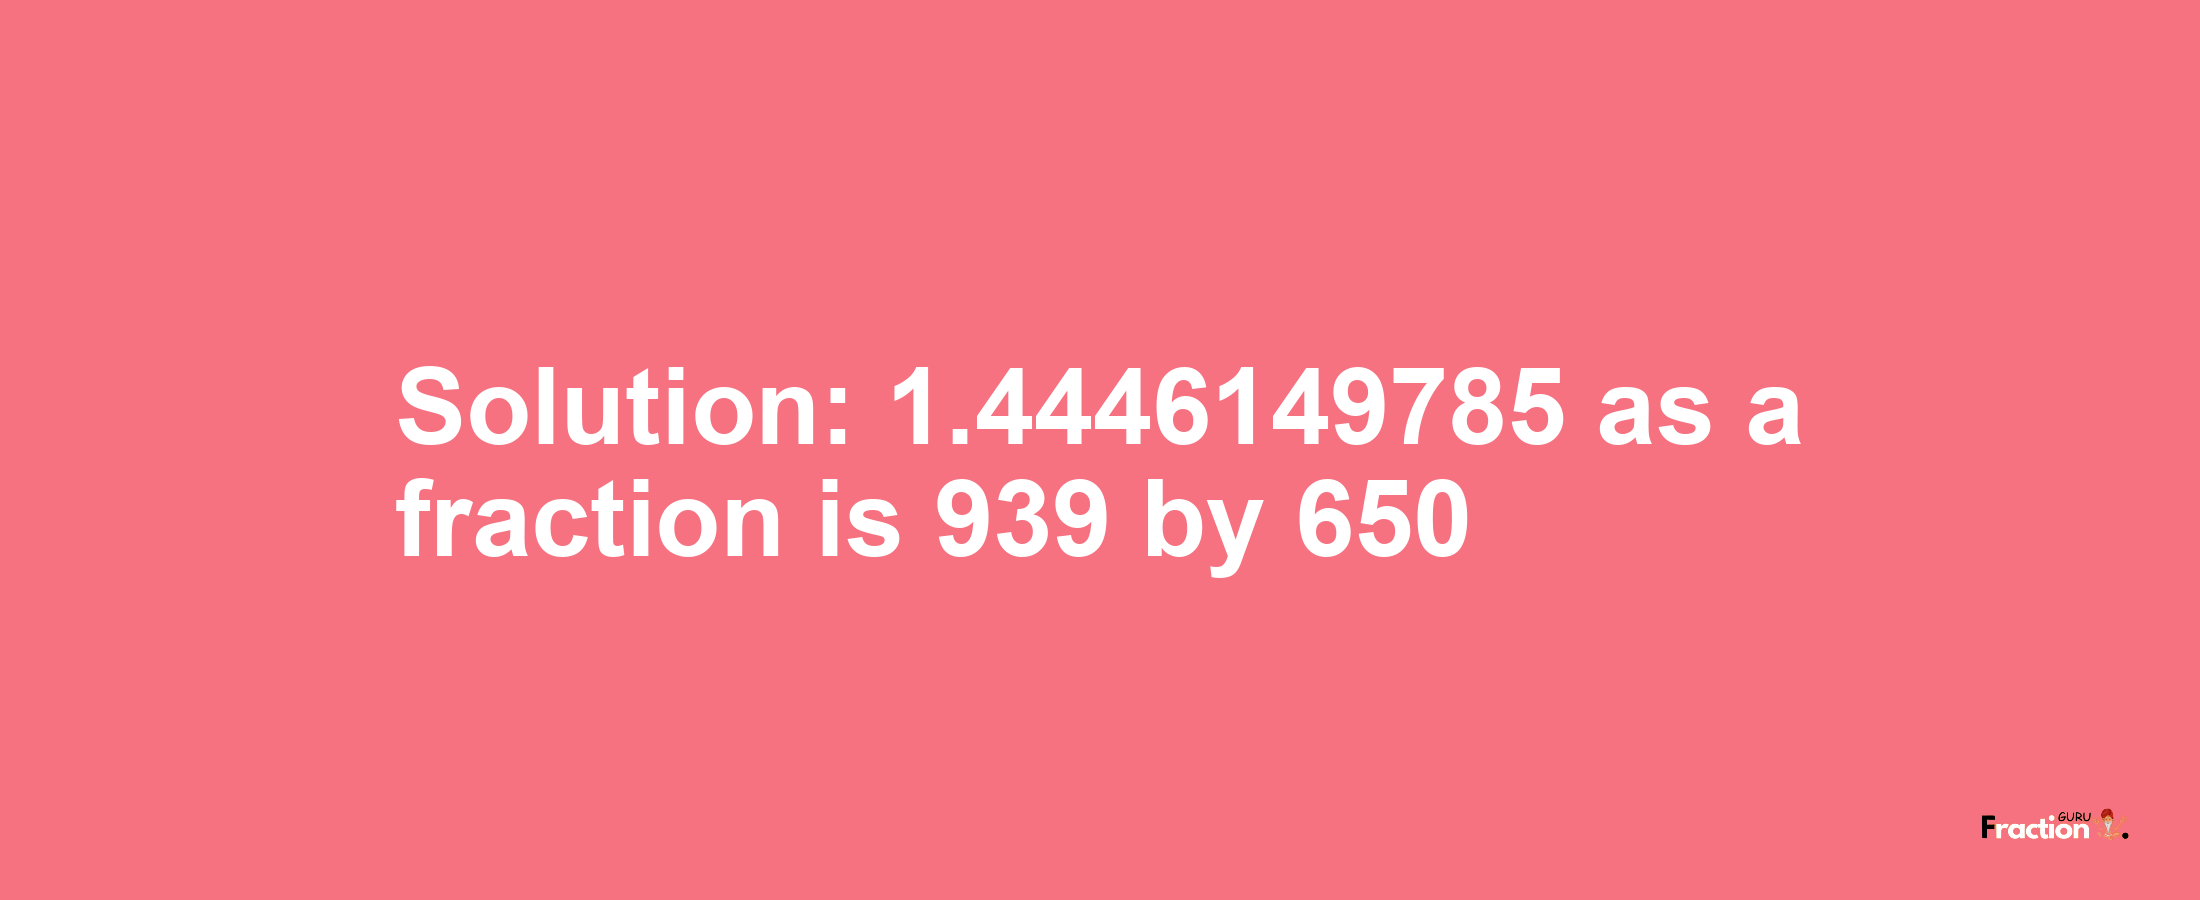 Solution:1.4446149785 as a fraction is 939/650